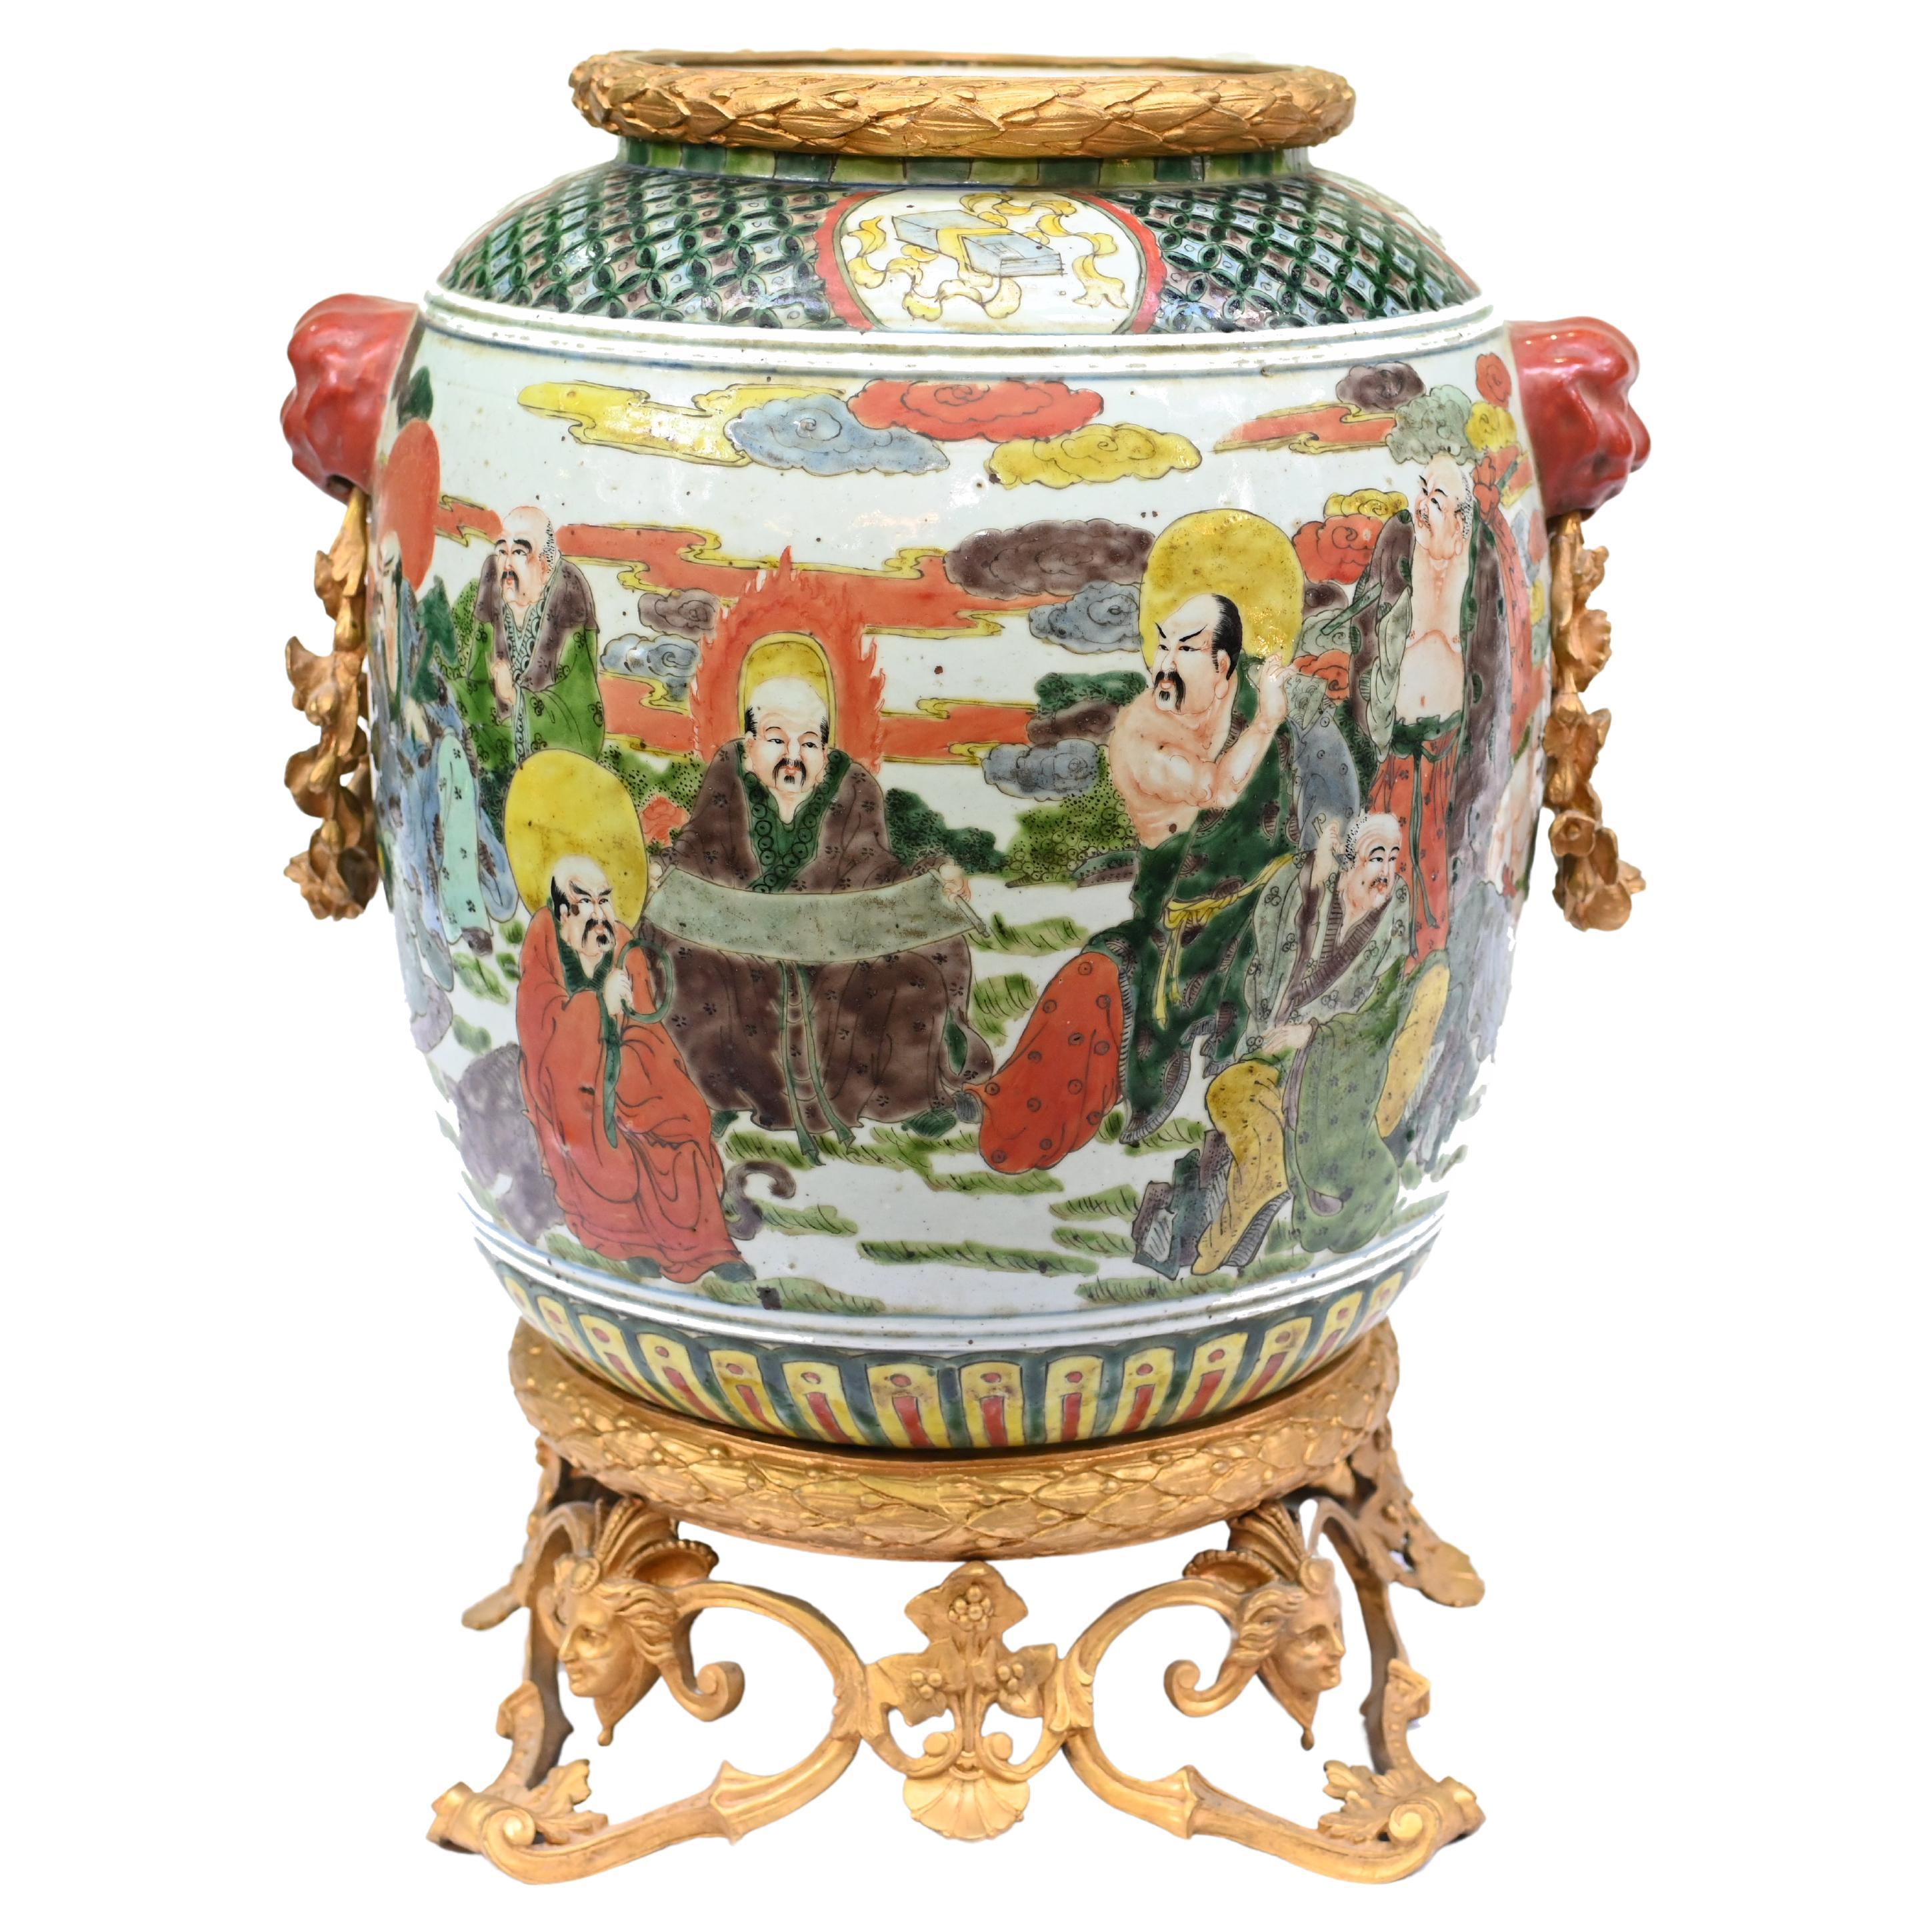 Who bought the Qianlong vase?